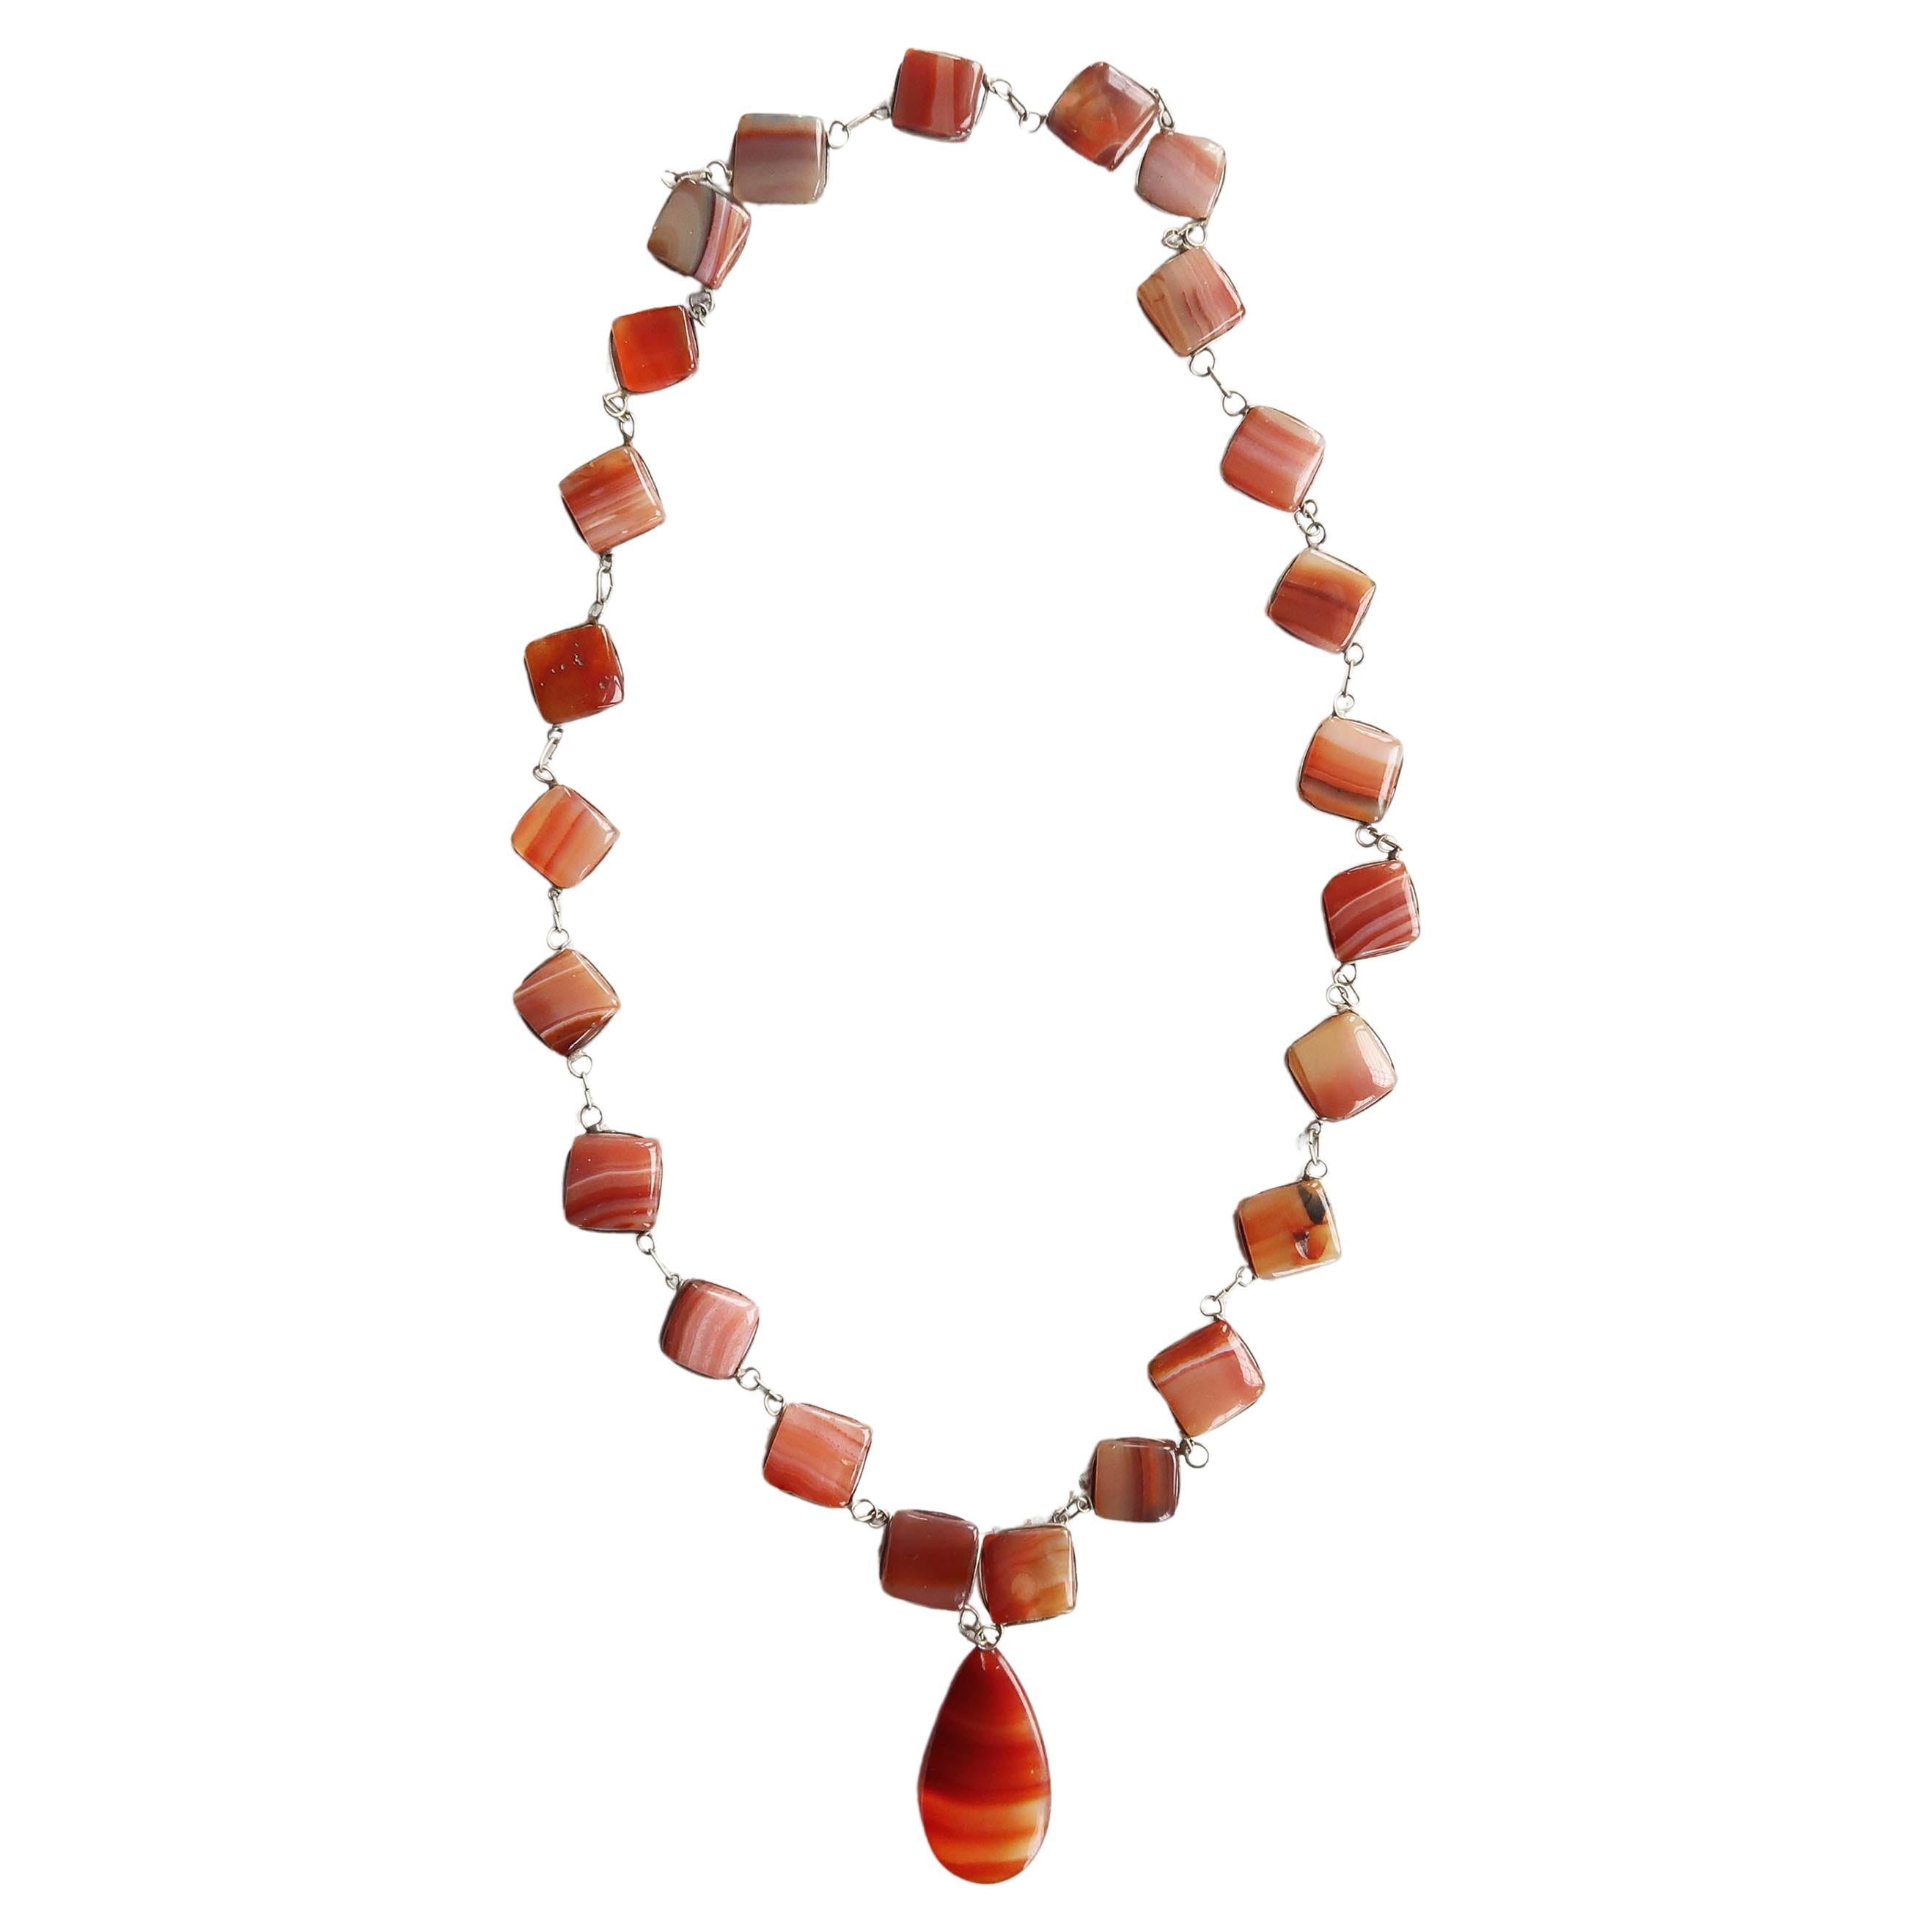 Vintage 1960's Costume Jewelry- A Carnelian Necklace. For Sale